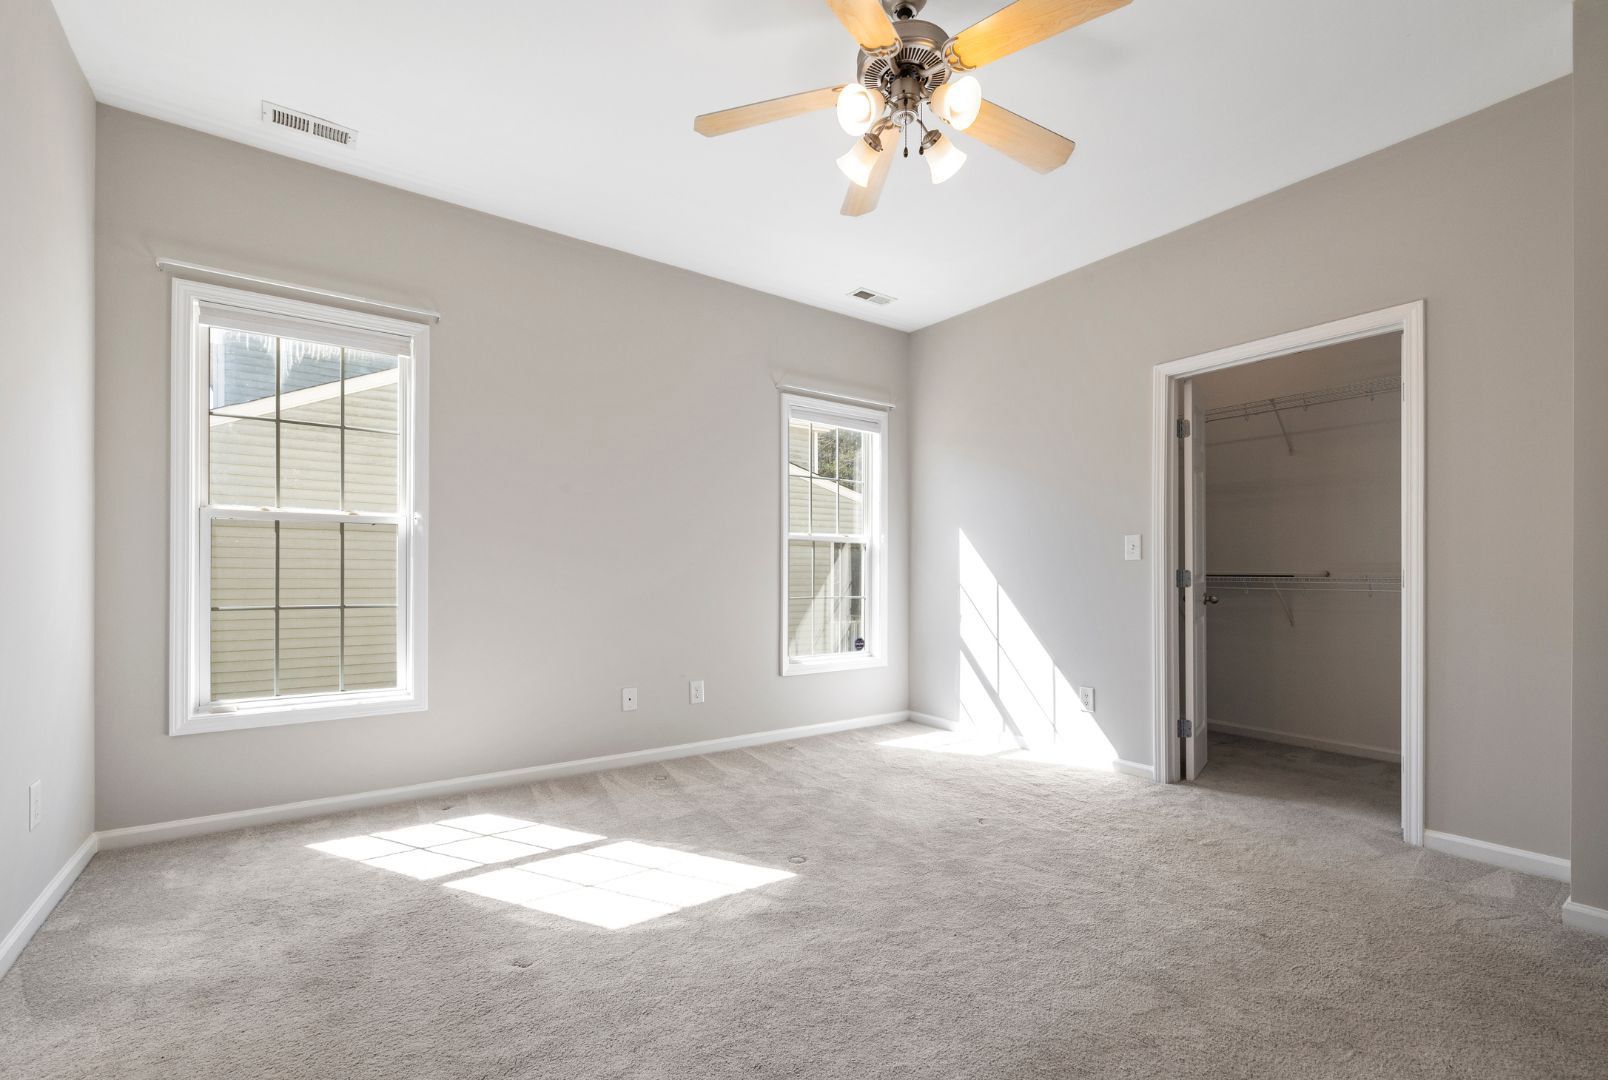 An empty bedroom with a ceiling fan and two windows.